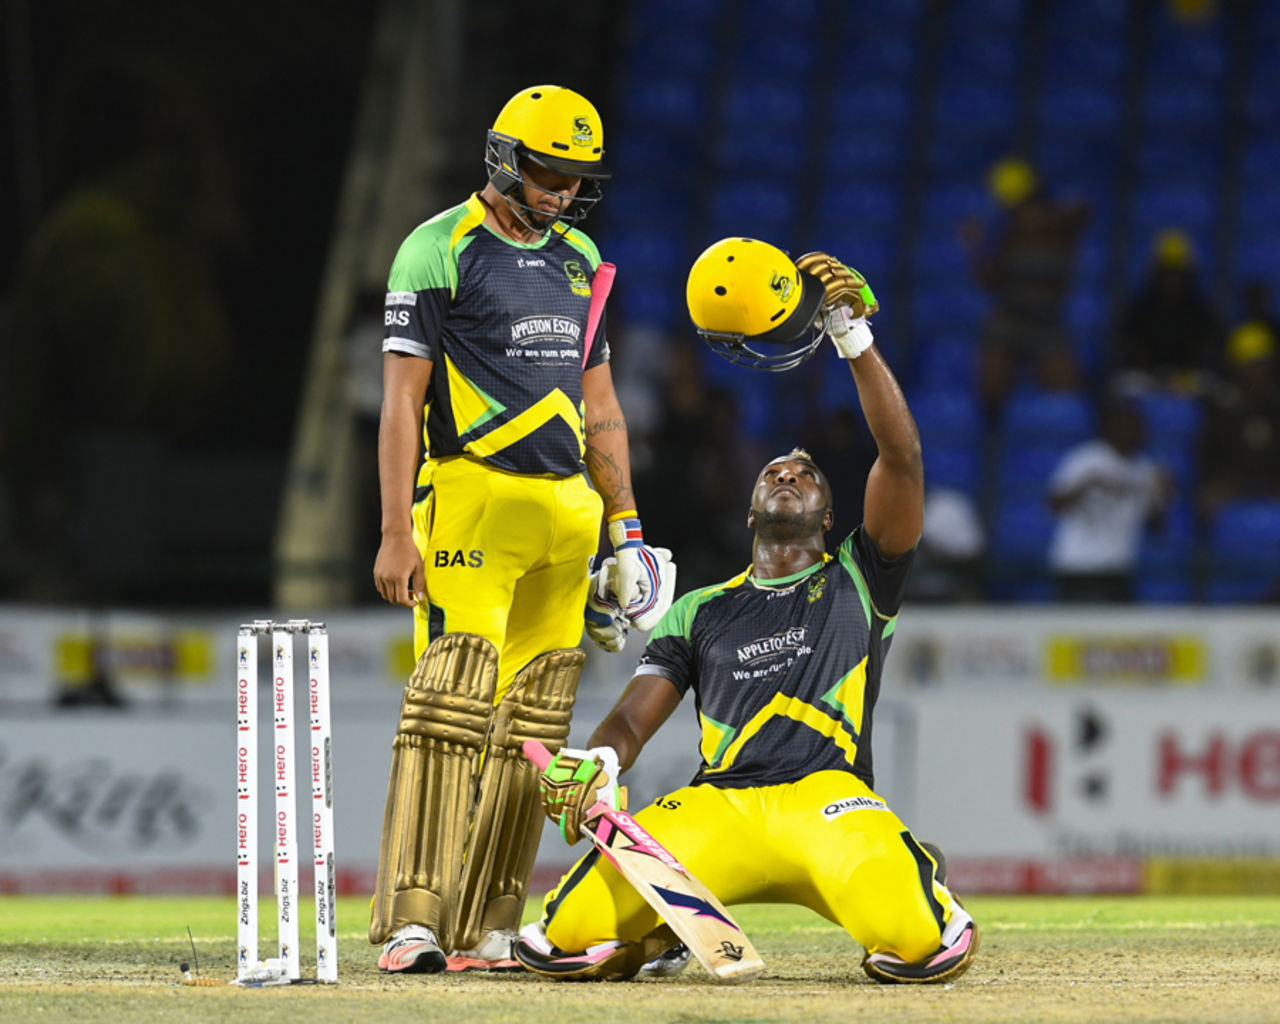 Andre Russell celebrates his whirlwind century, Jamaica Tallawahs v Trinbago Knight Riders, CPL 2016, Qualifier 2, St Kitts, August 5, 2016